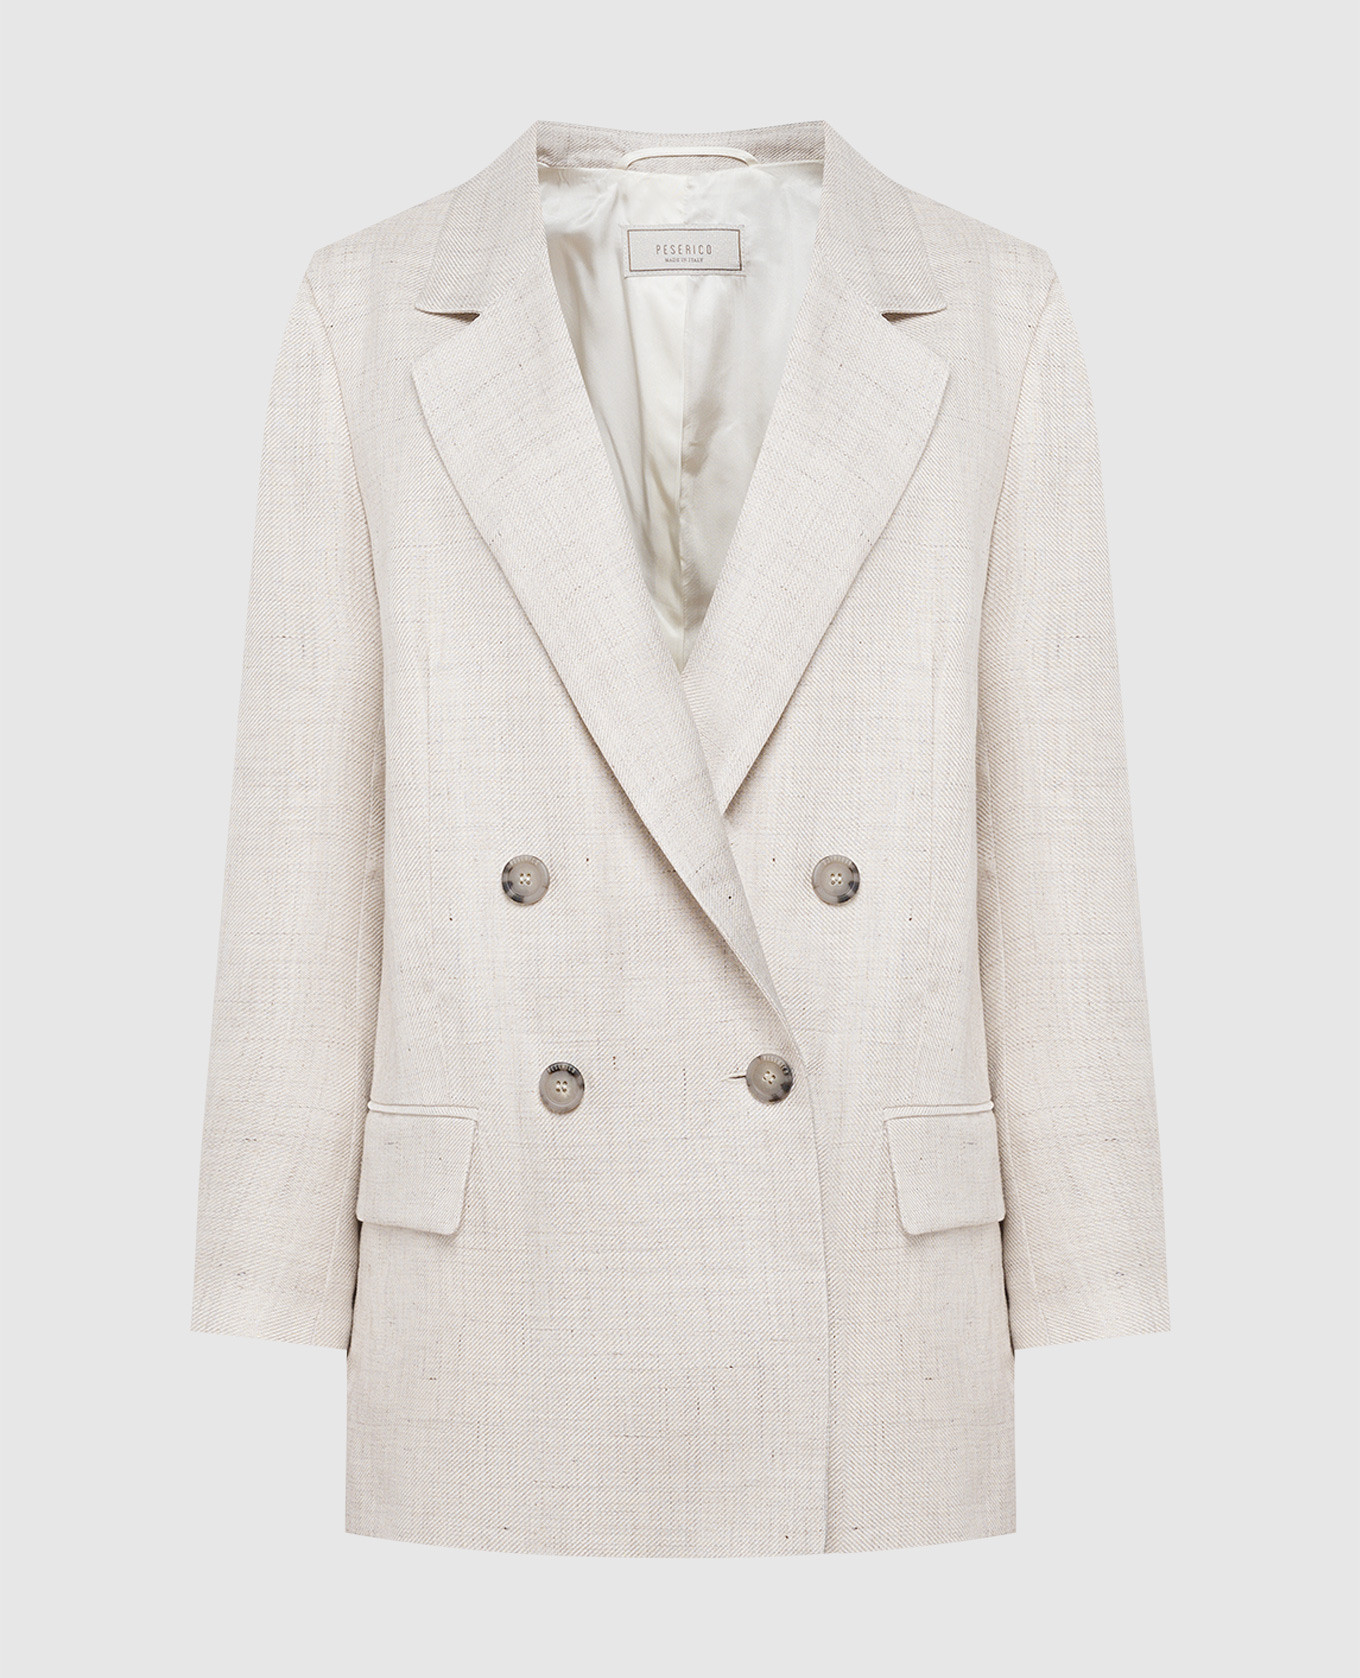 Beige double-breasted jacket with linen